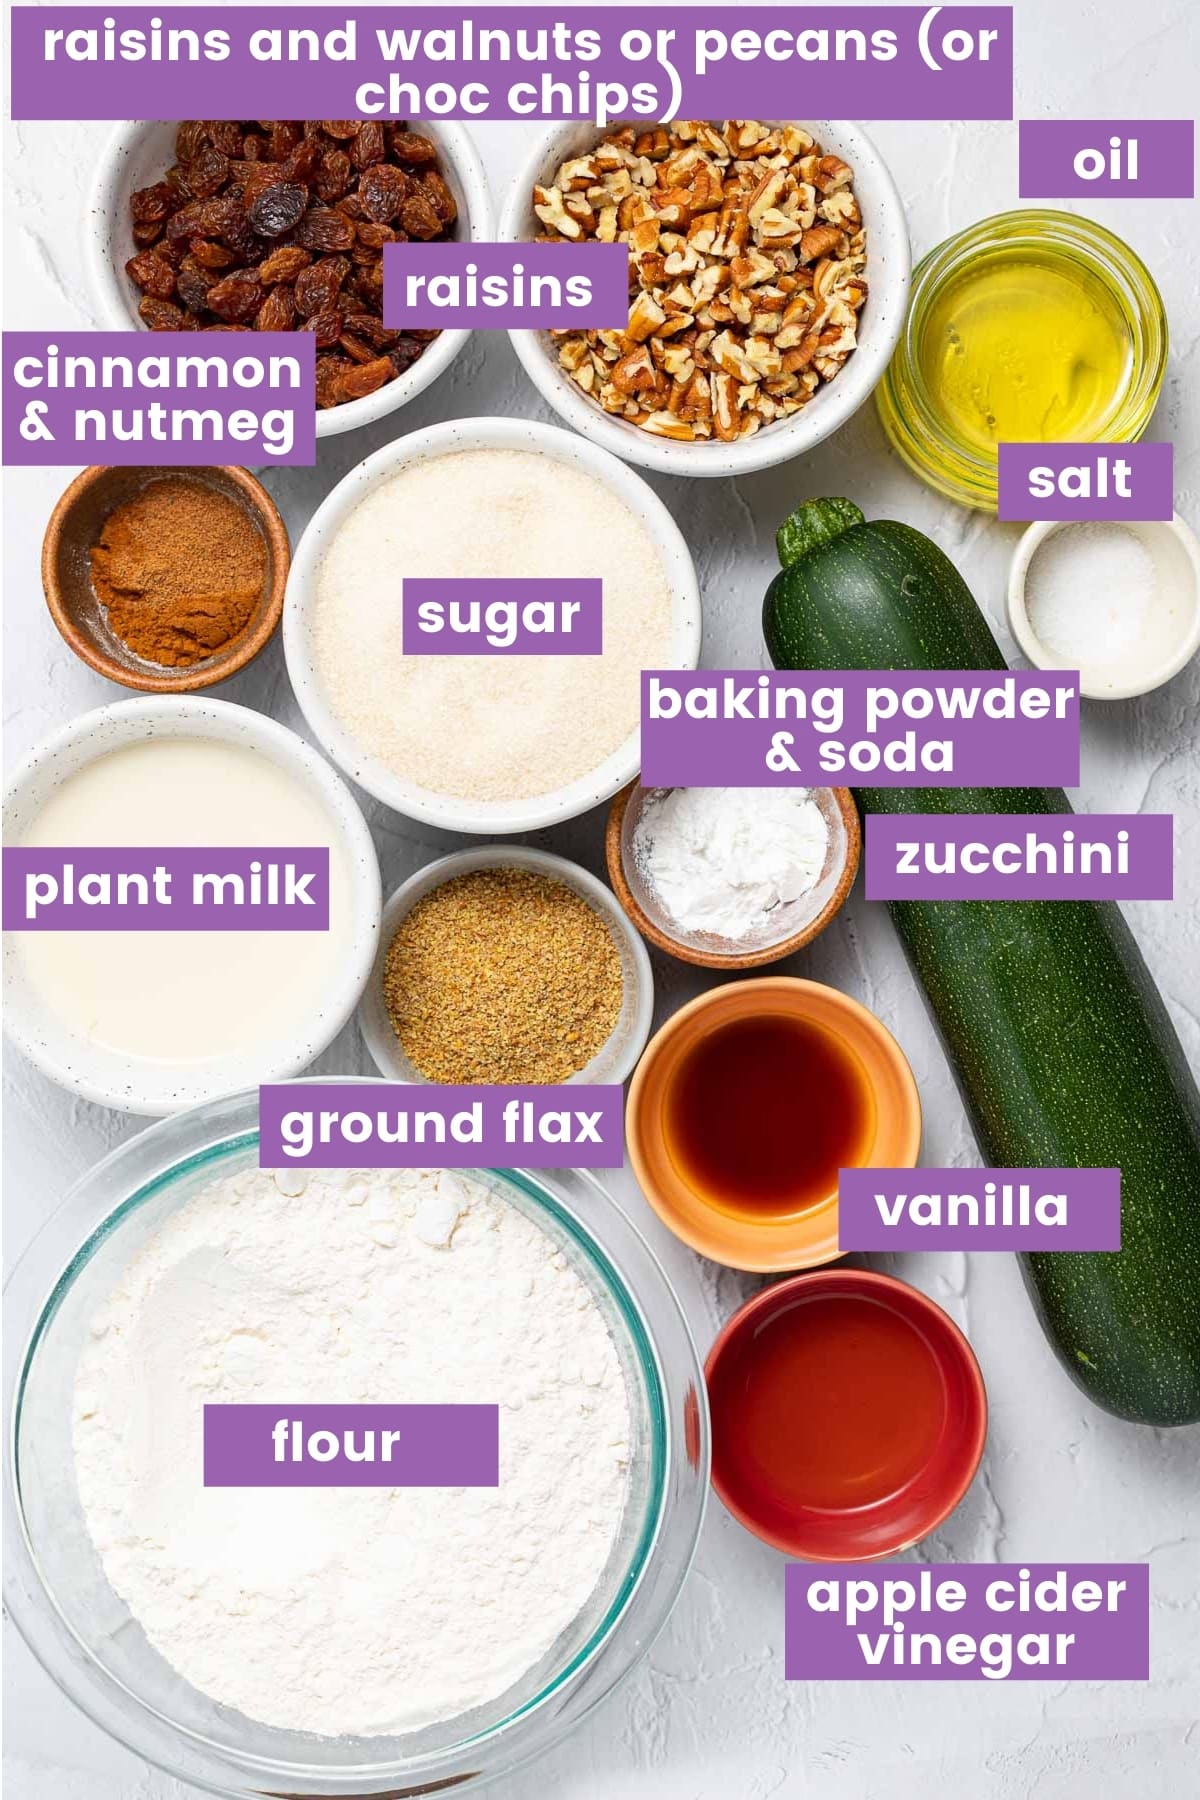 ingredients for zucchini muffins as per written list